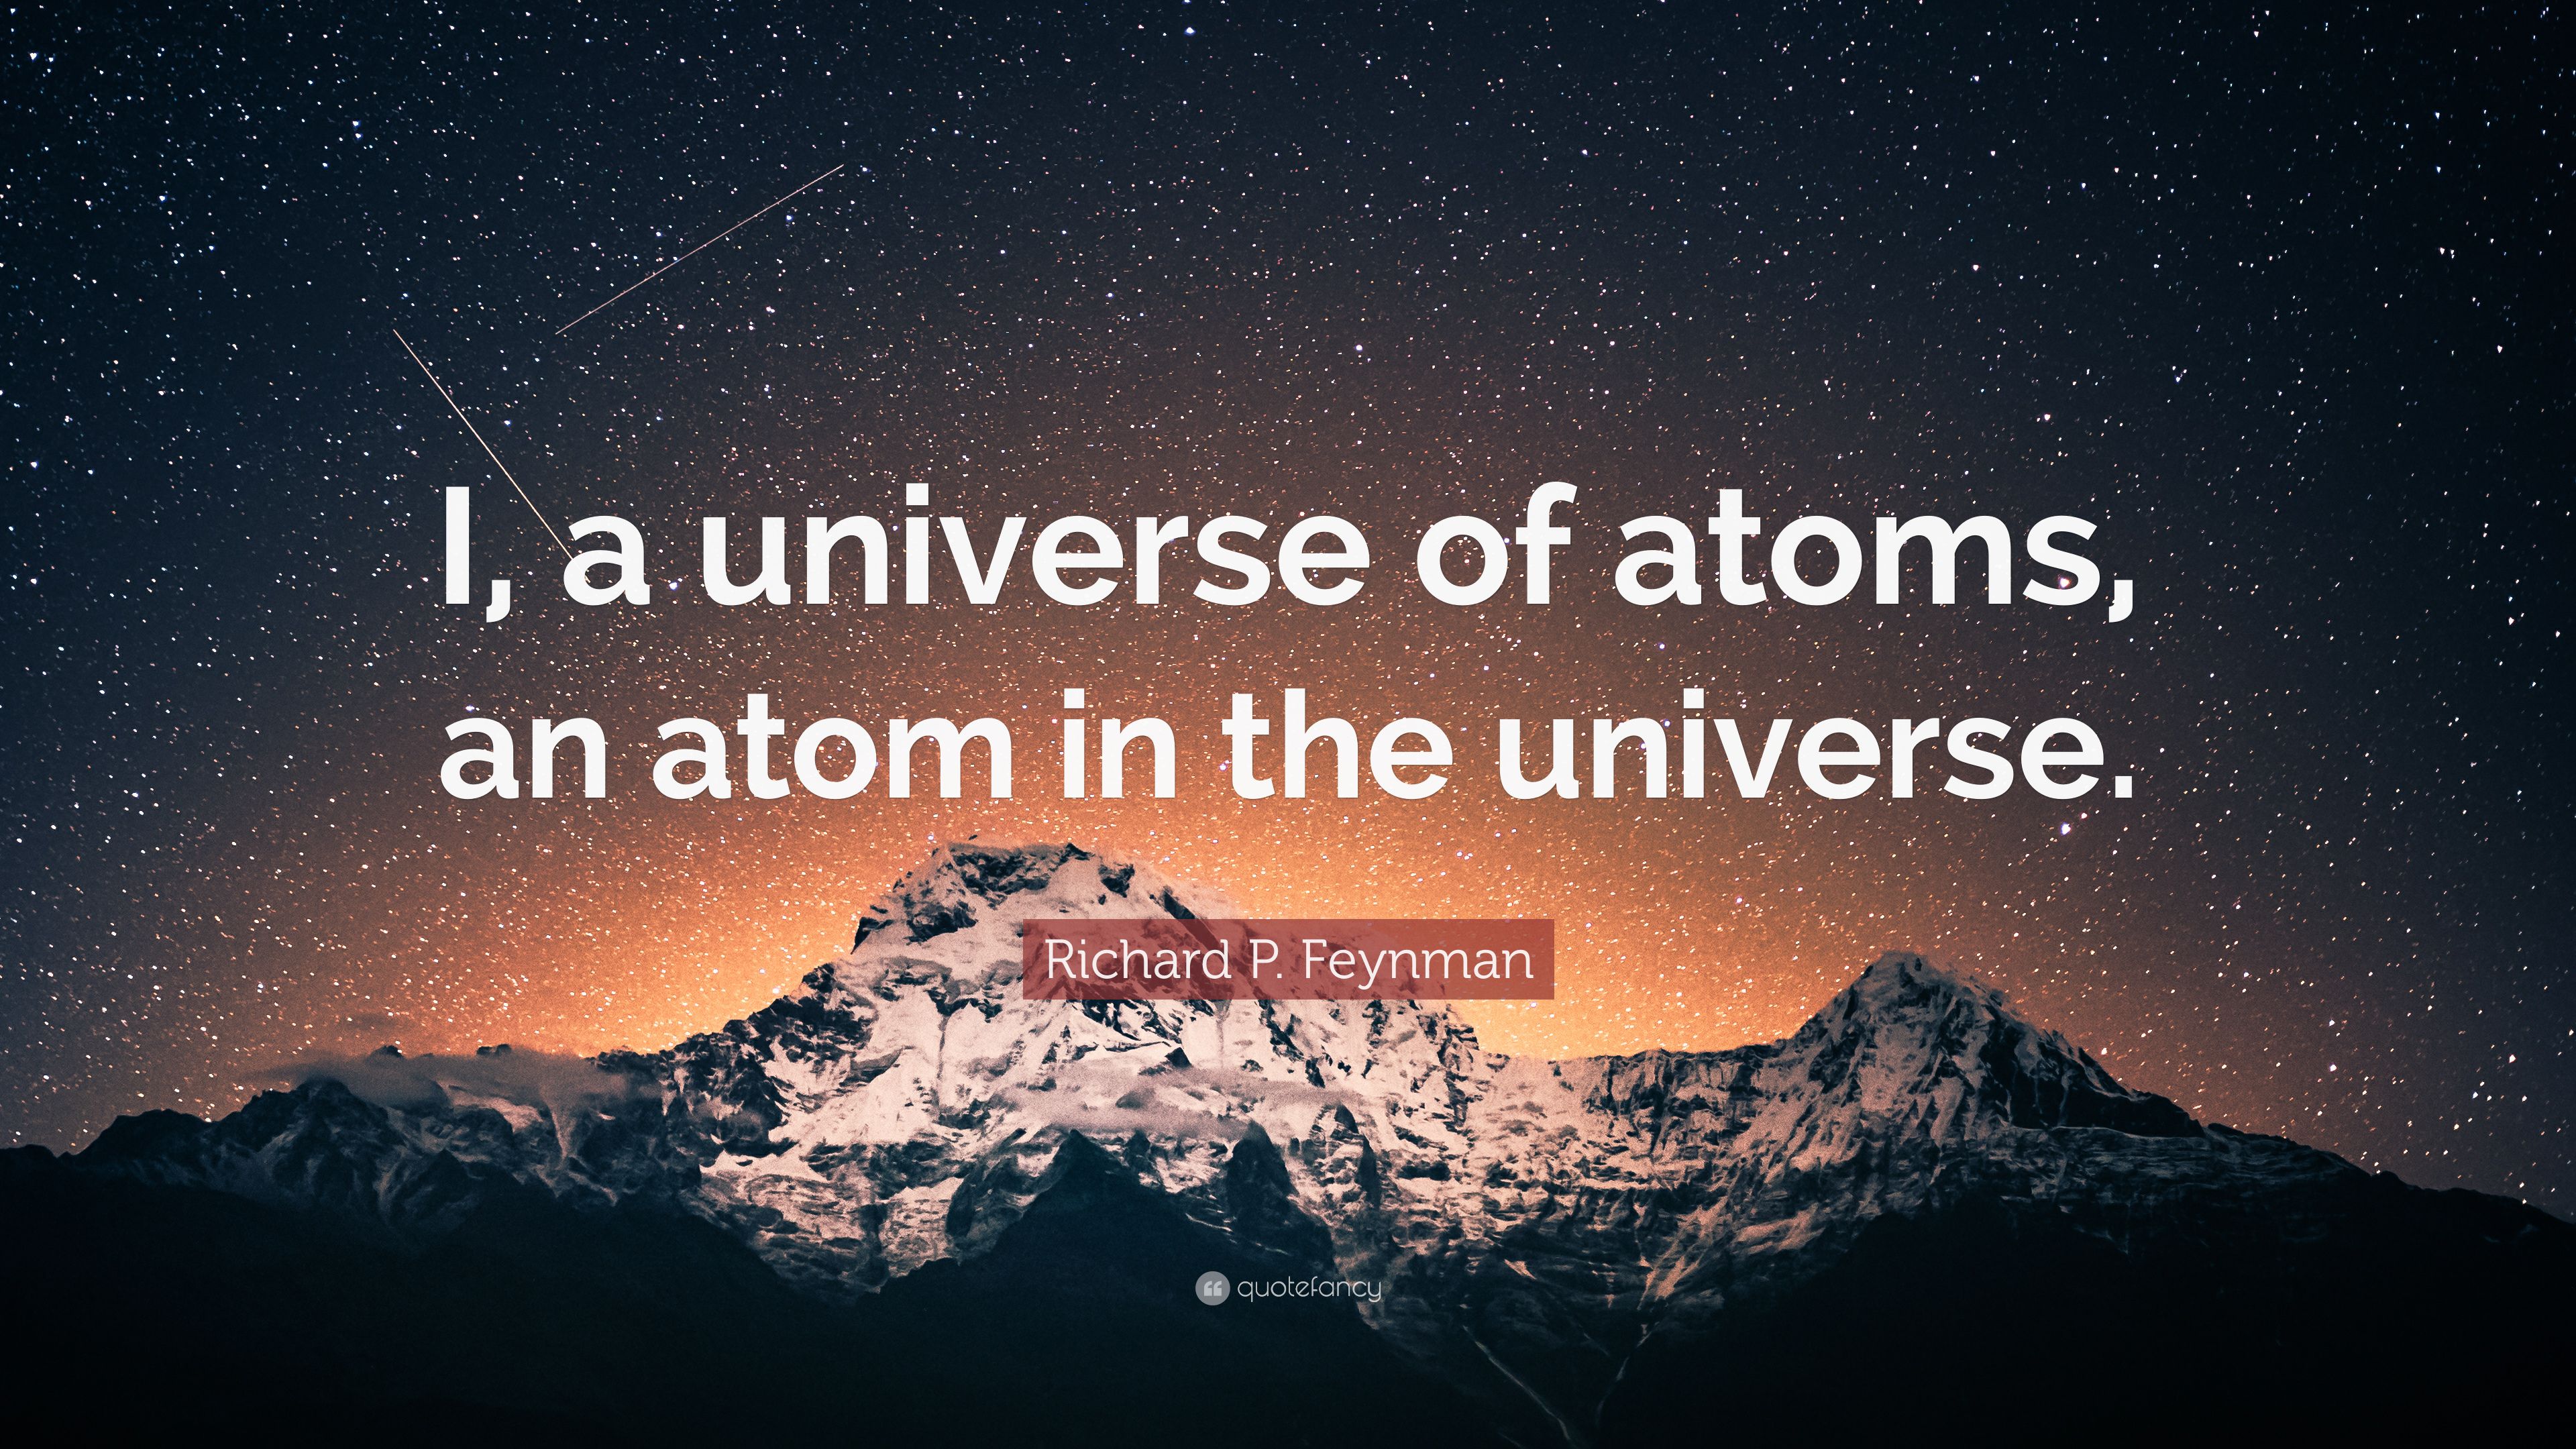 Richard P. Feynman Quote: “I, a universe of atoms, an atom in